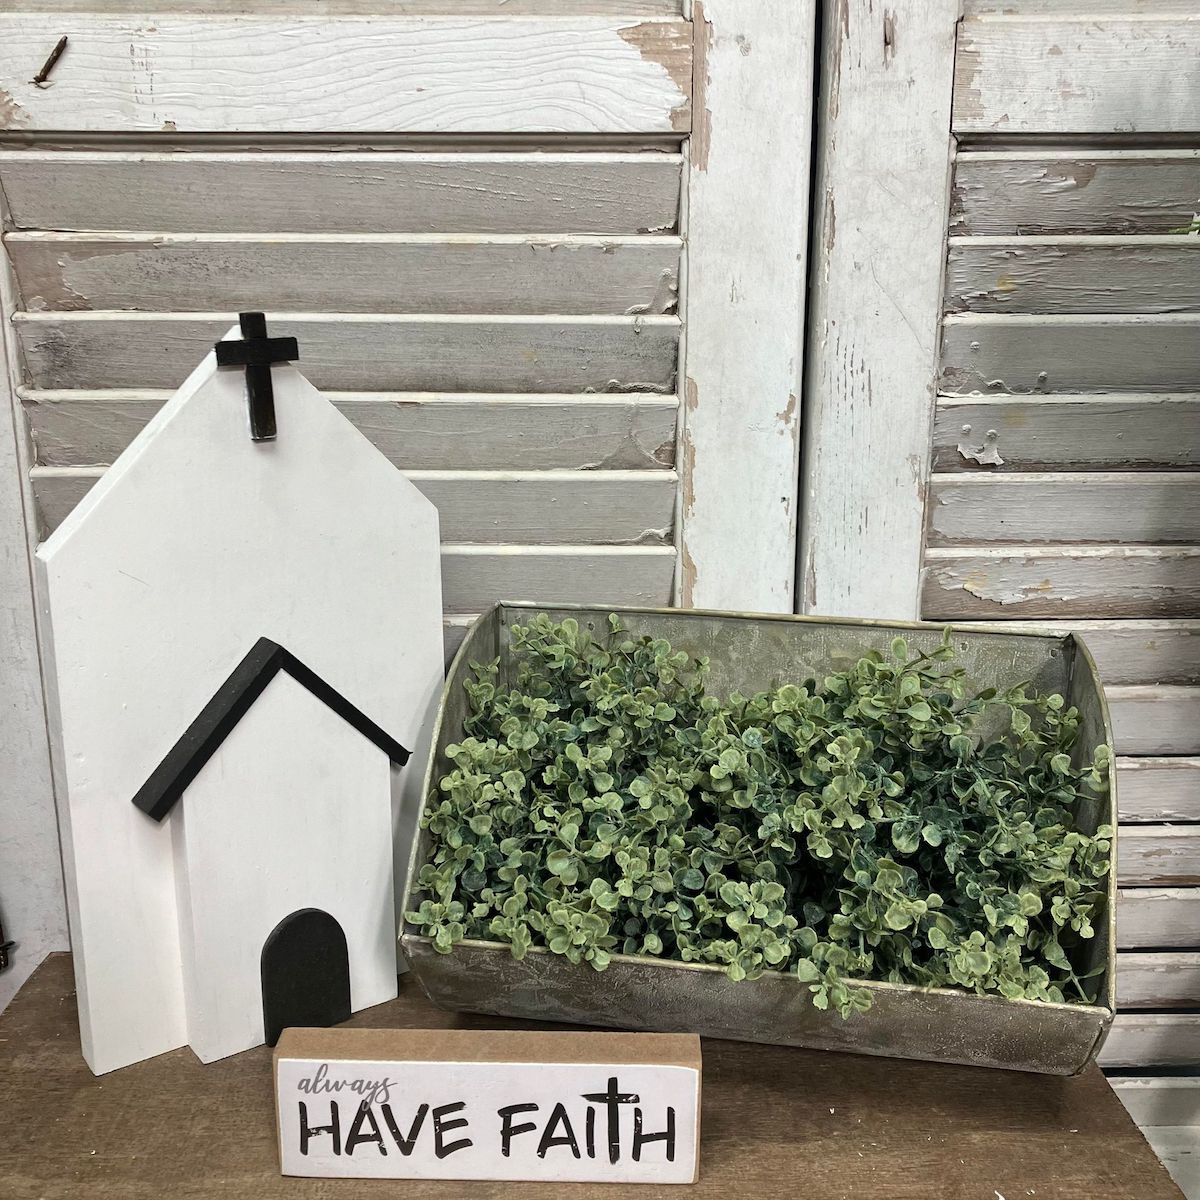 Galvanized Decorative Grain Scoop with Greenery and locally made church